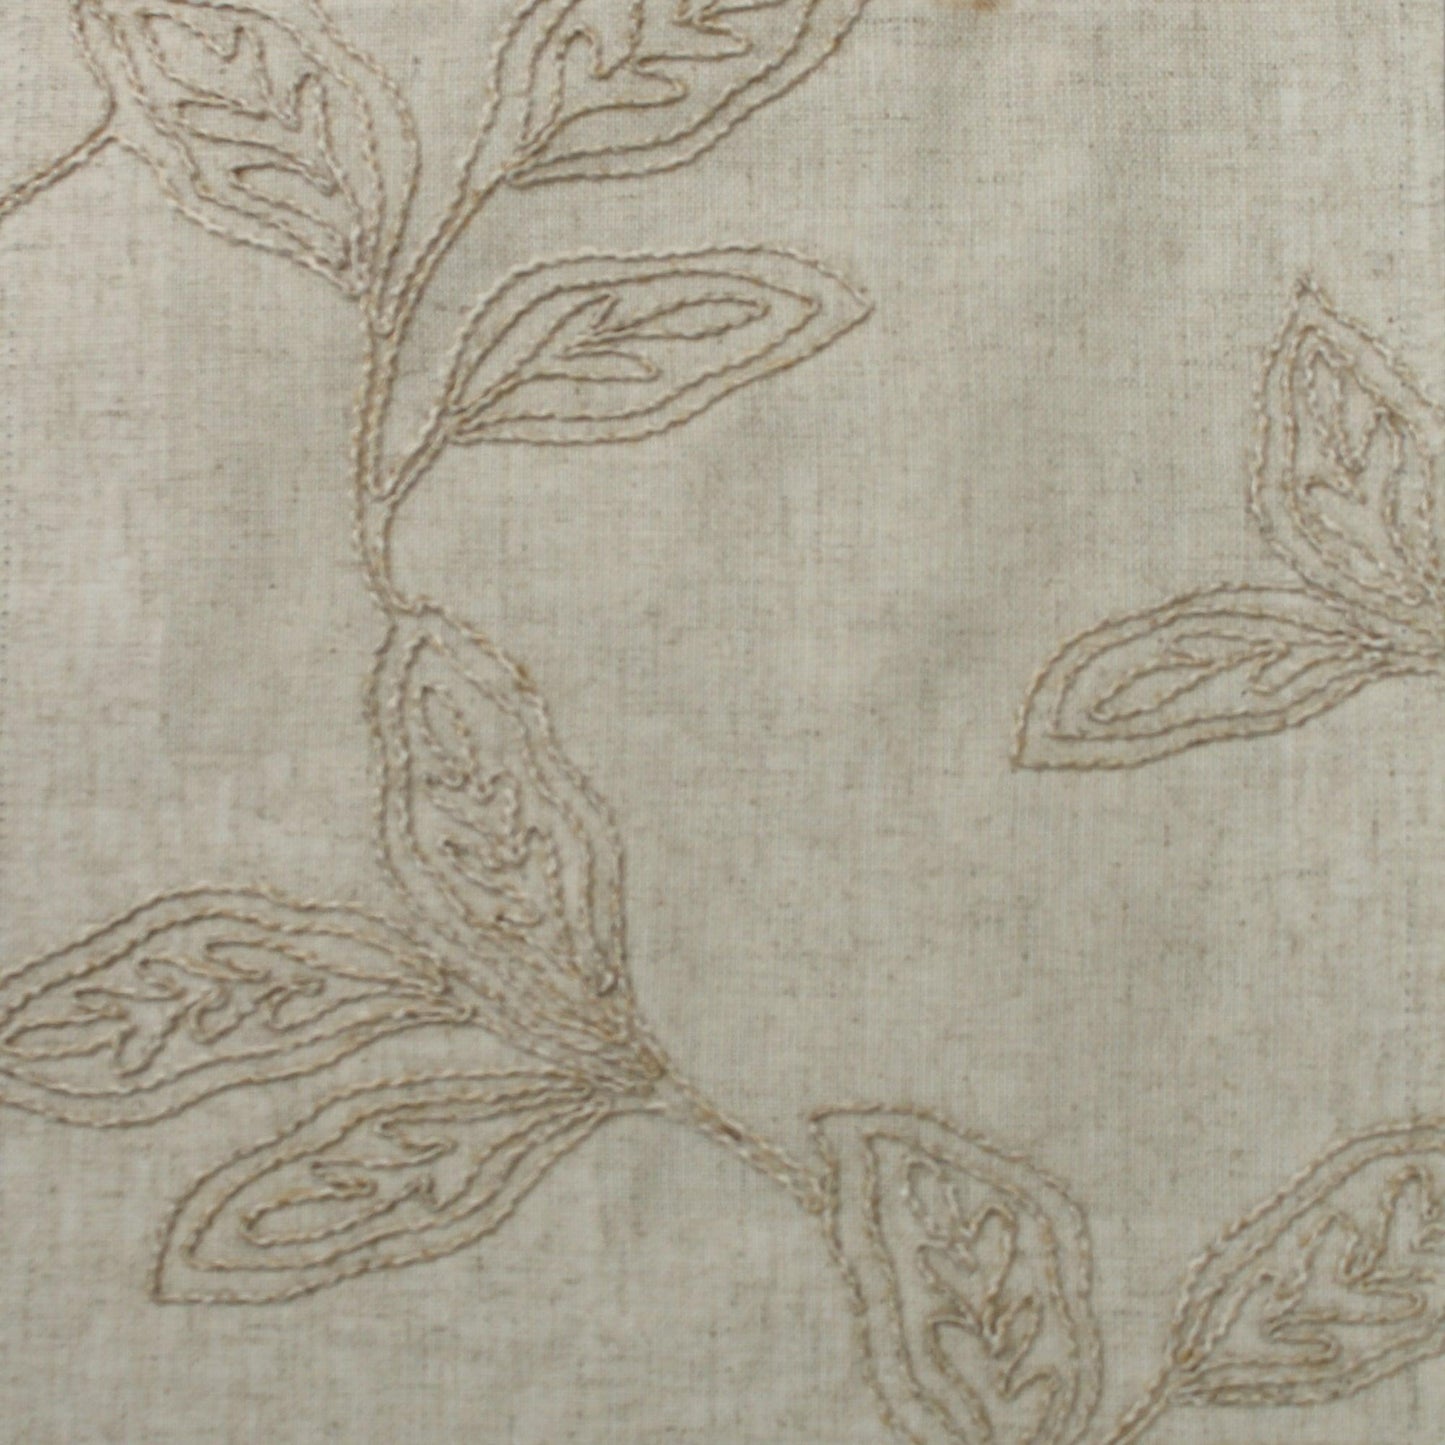 Linen floral embroidered fabric for curtains.